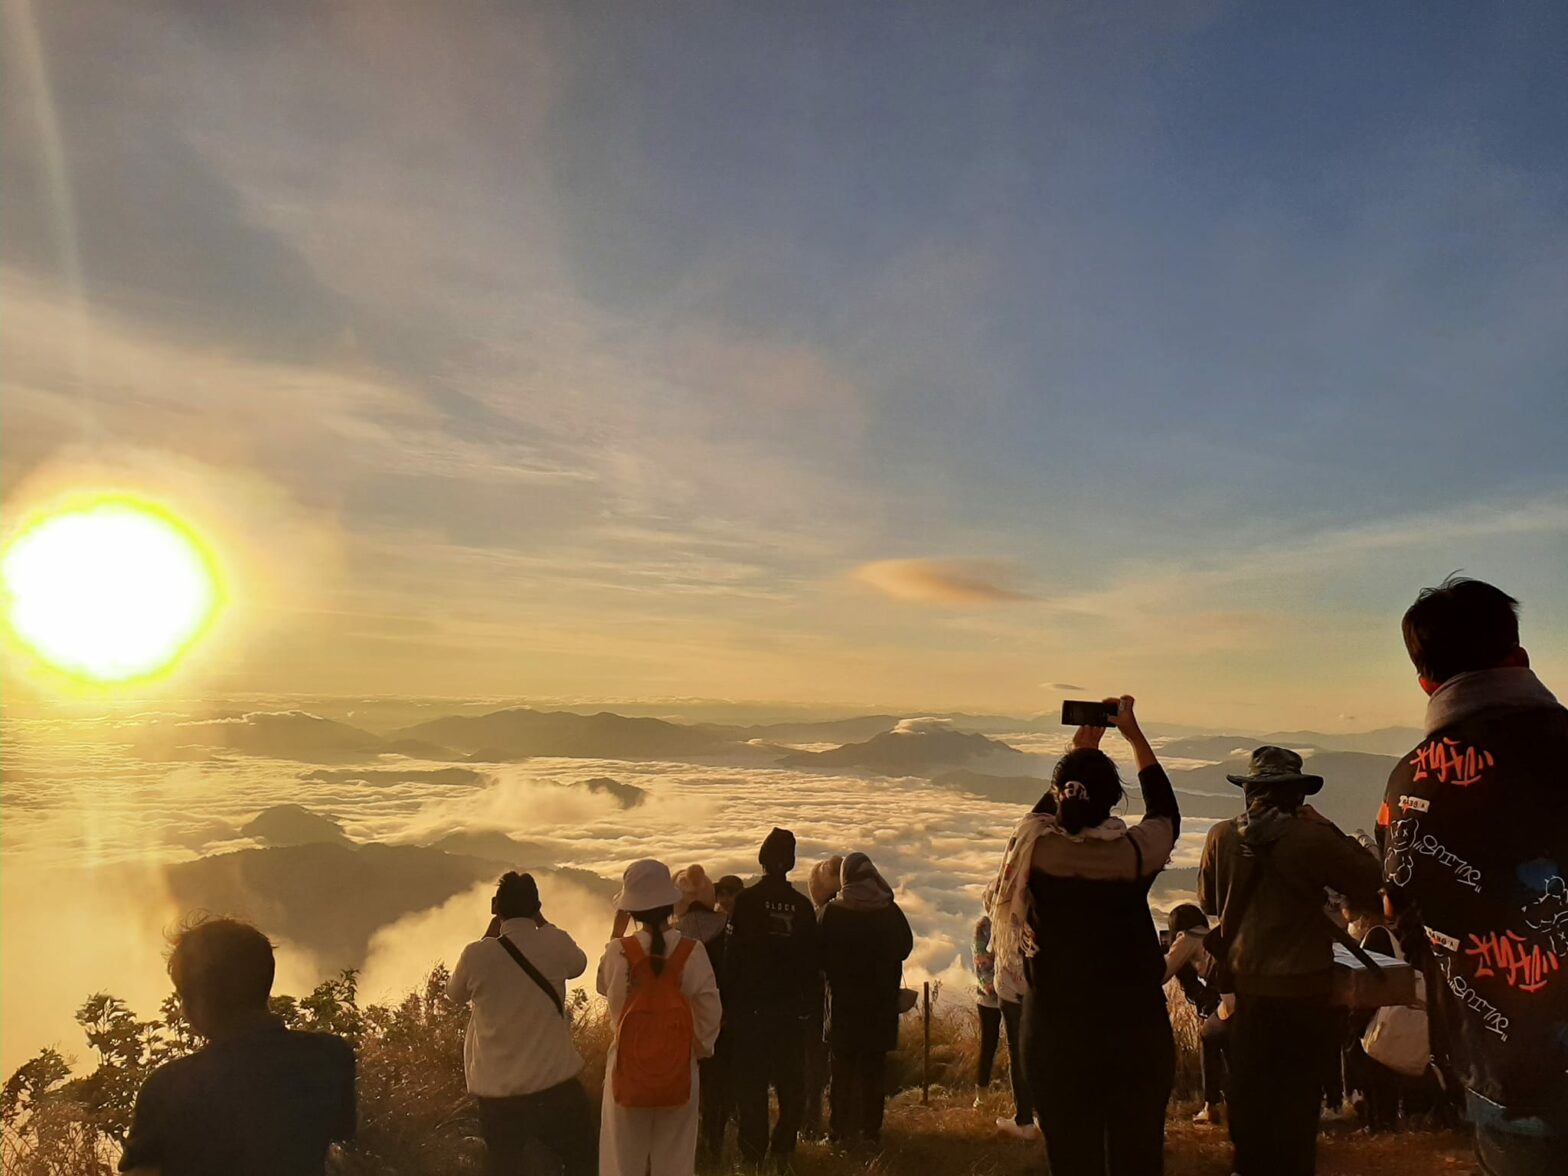 Happy Nature Year: Half a million visited Thai national parks to ring in new year